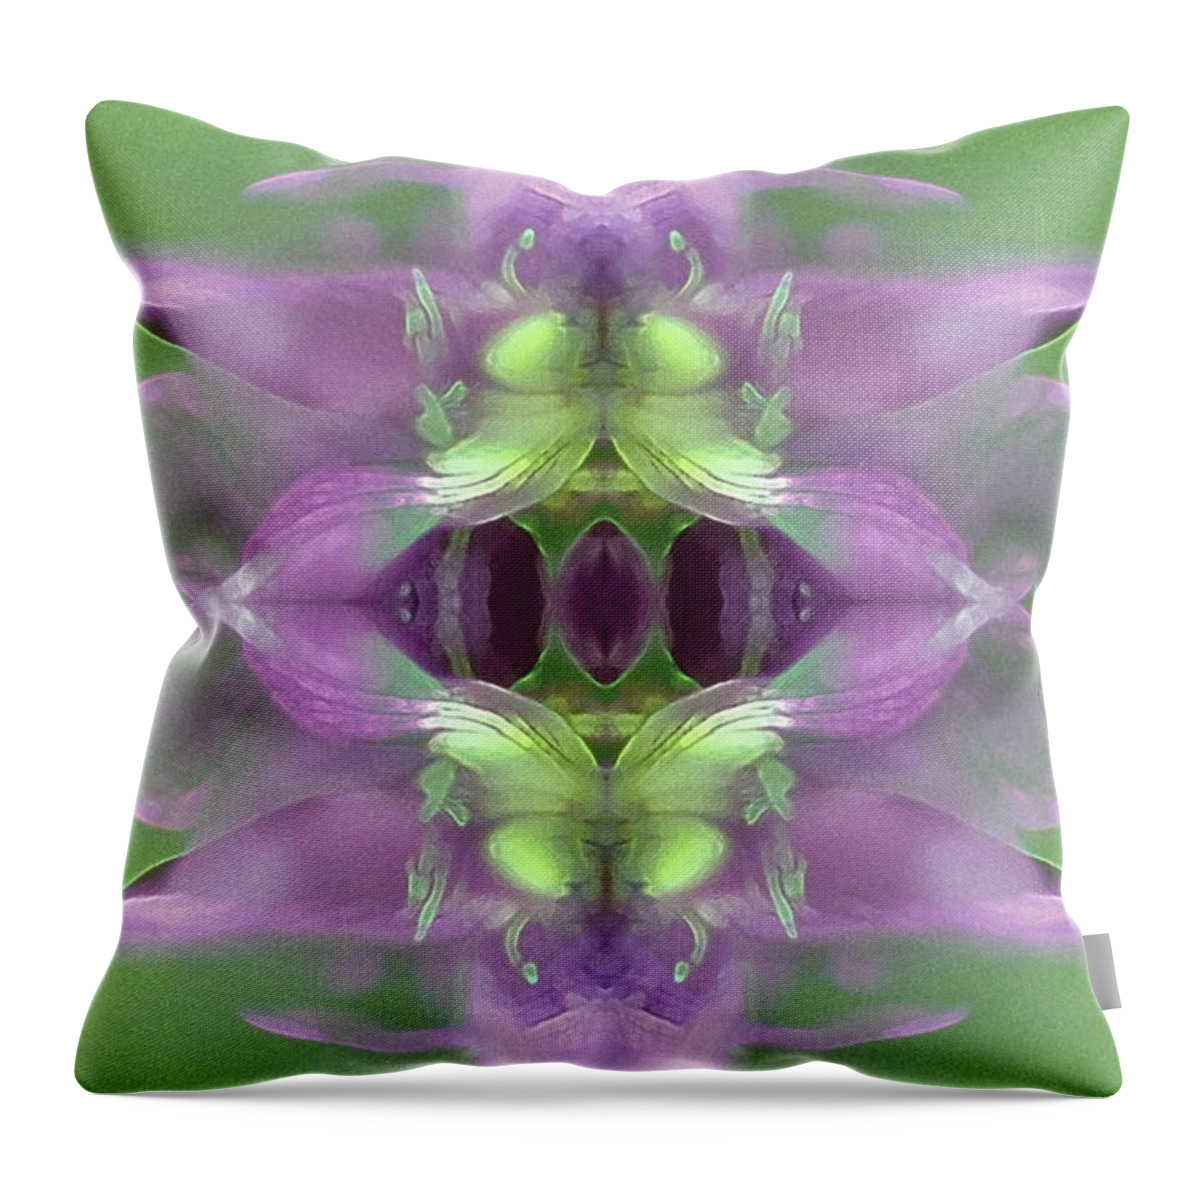 Image Tags Throw Pillow featuring the digital art Floral_00PF by Alex W McDonell